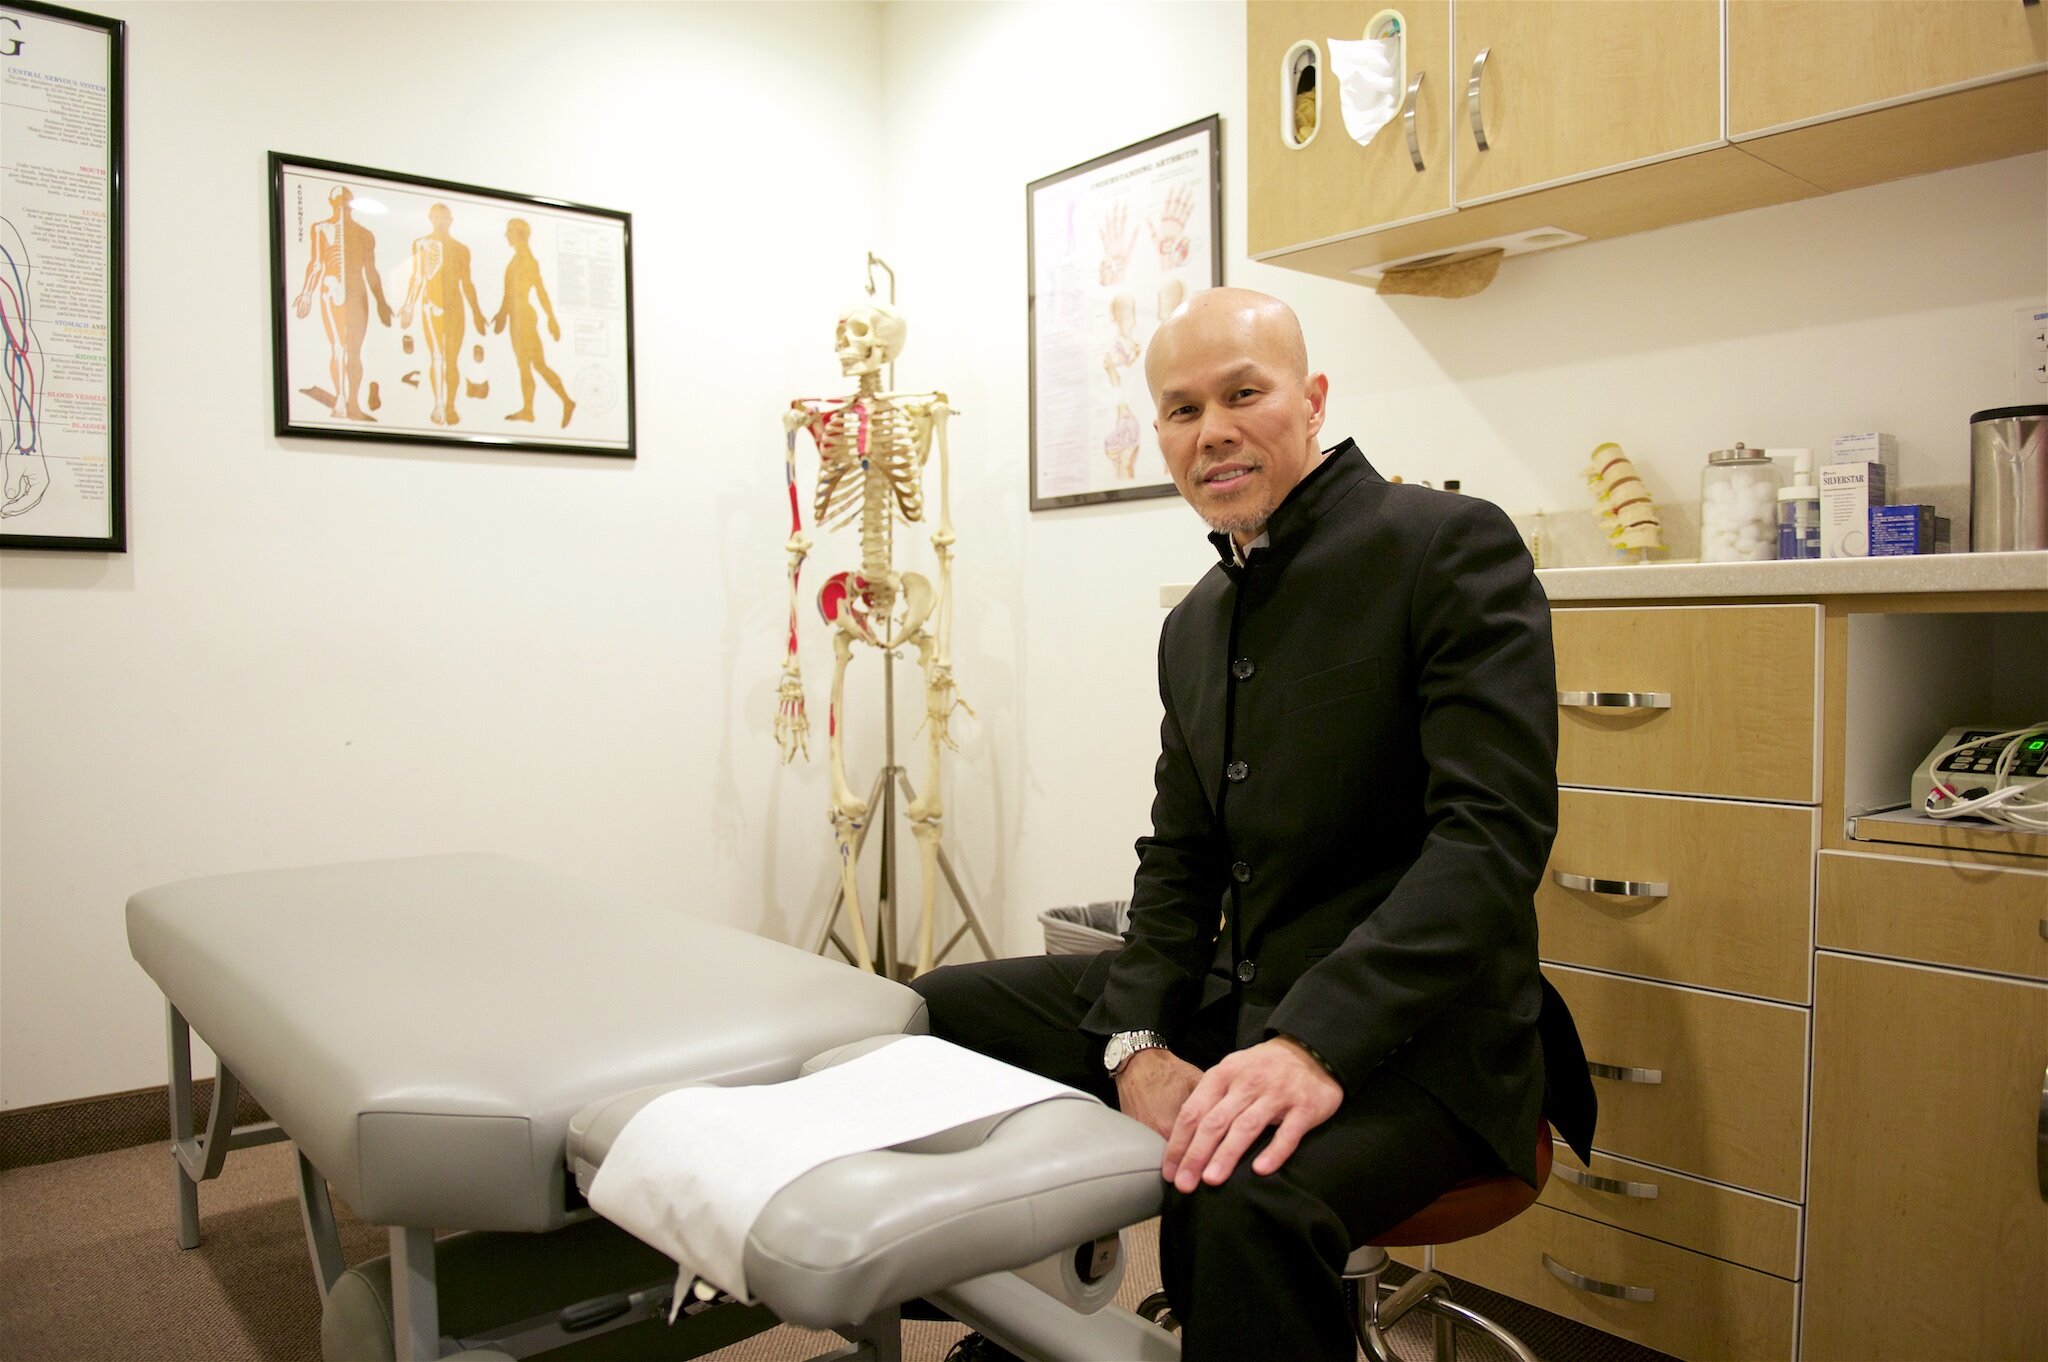 Paul Lee, DC, Chiropractor and Acupuncturist